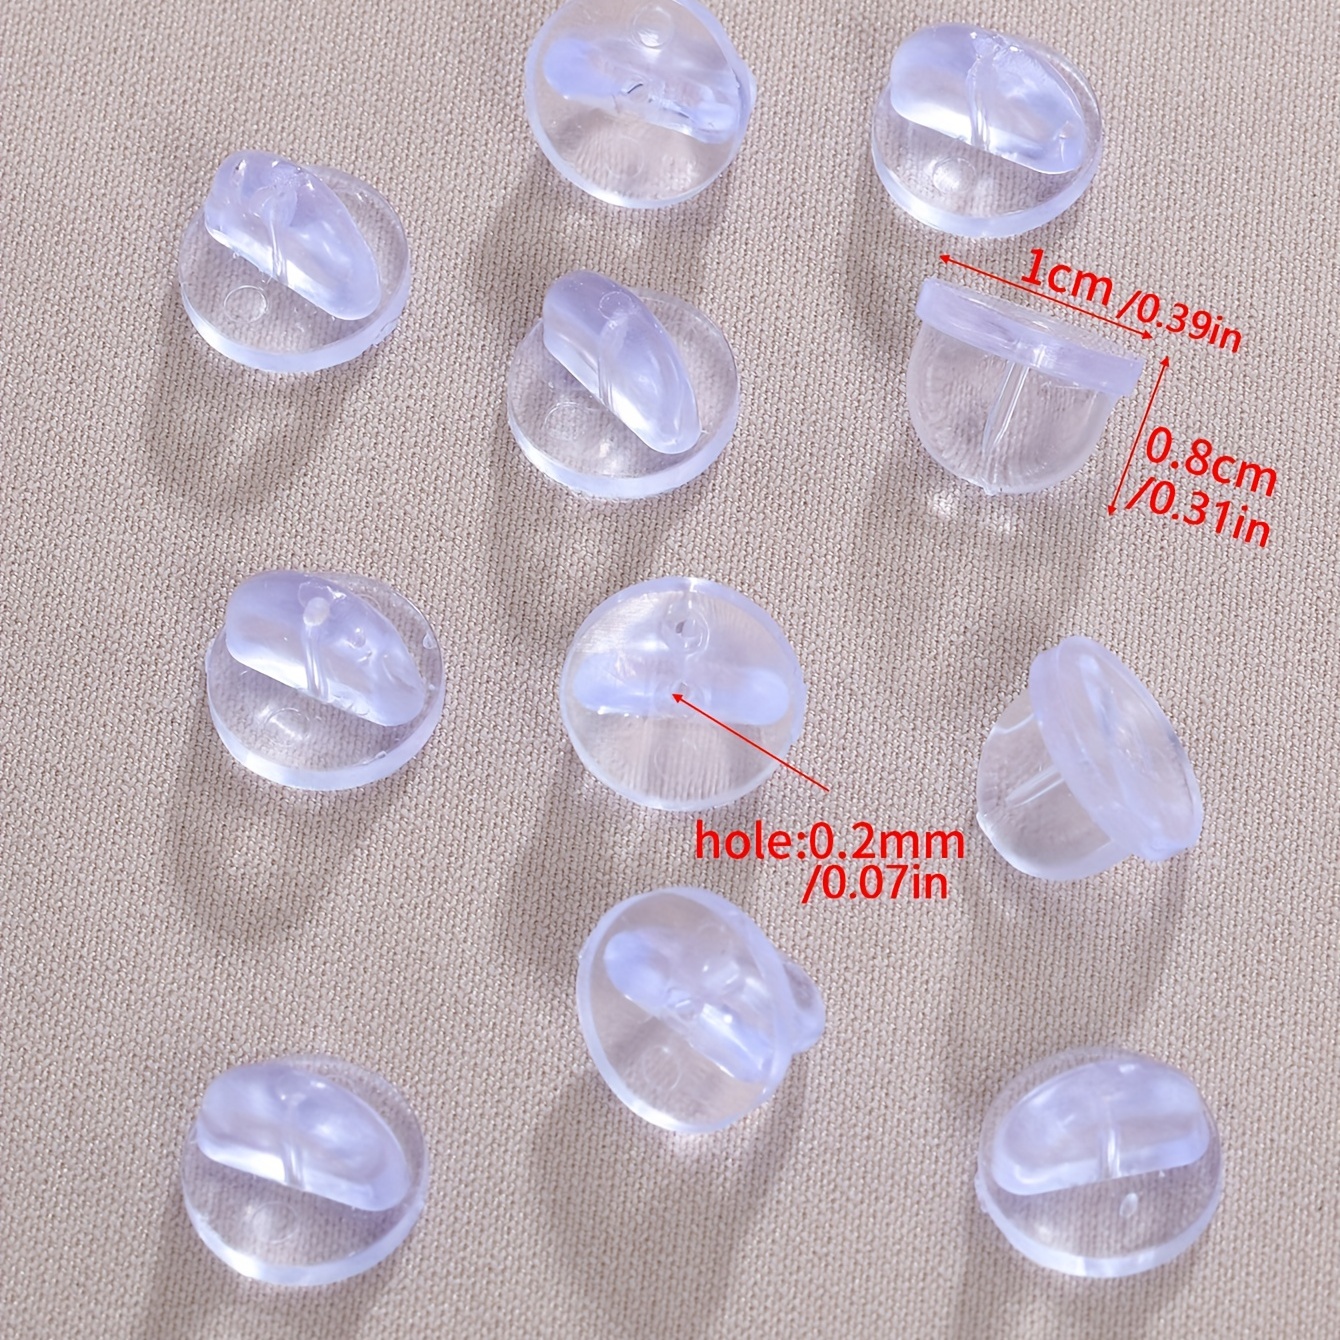 100pcs Clutch Rubber Pin Backs Keepers Replacement Uniform Badge